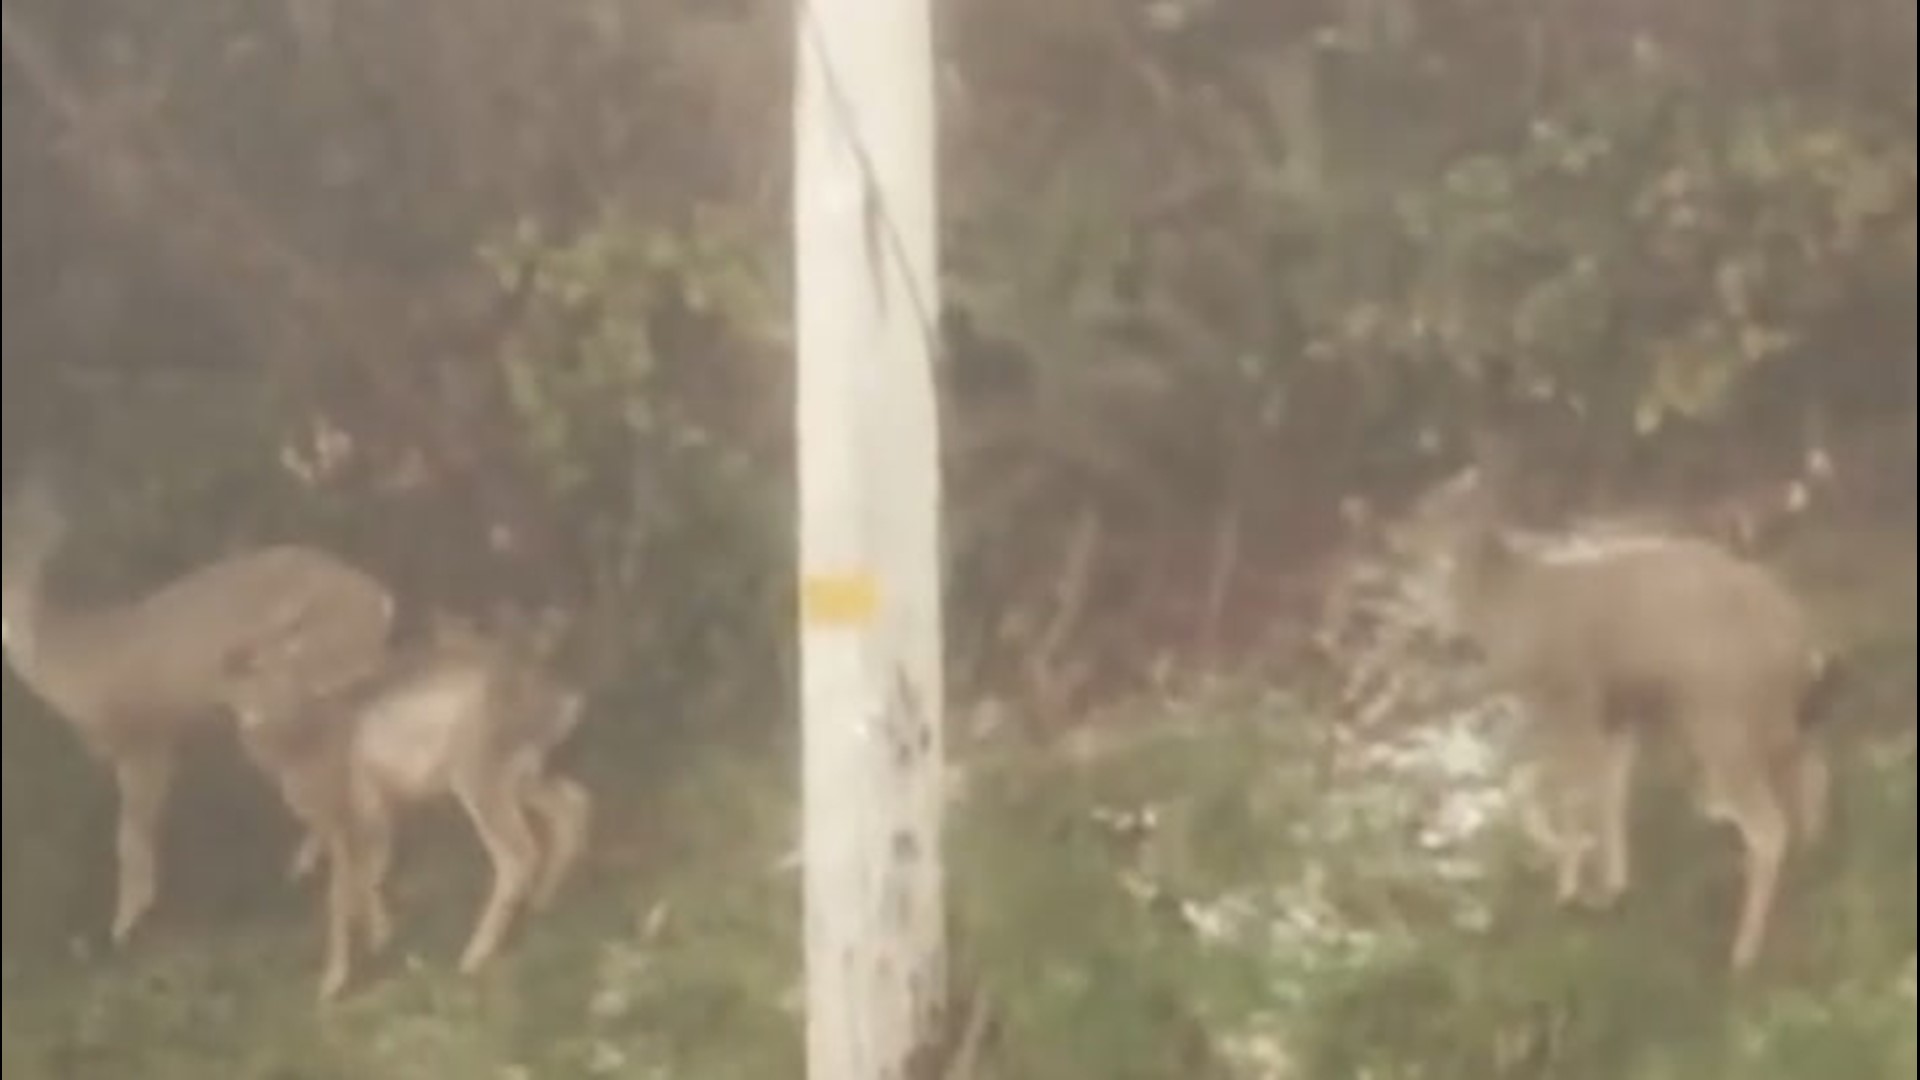 Deer were seen riding out a storm in Astoria, Oregon, before a lightning flash and thunder scared them off on March 7.